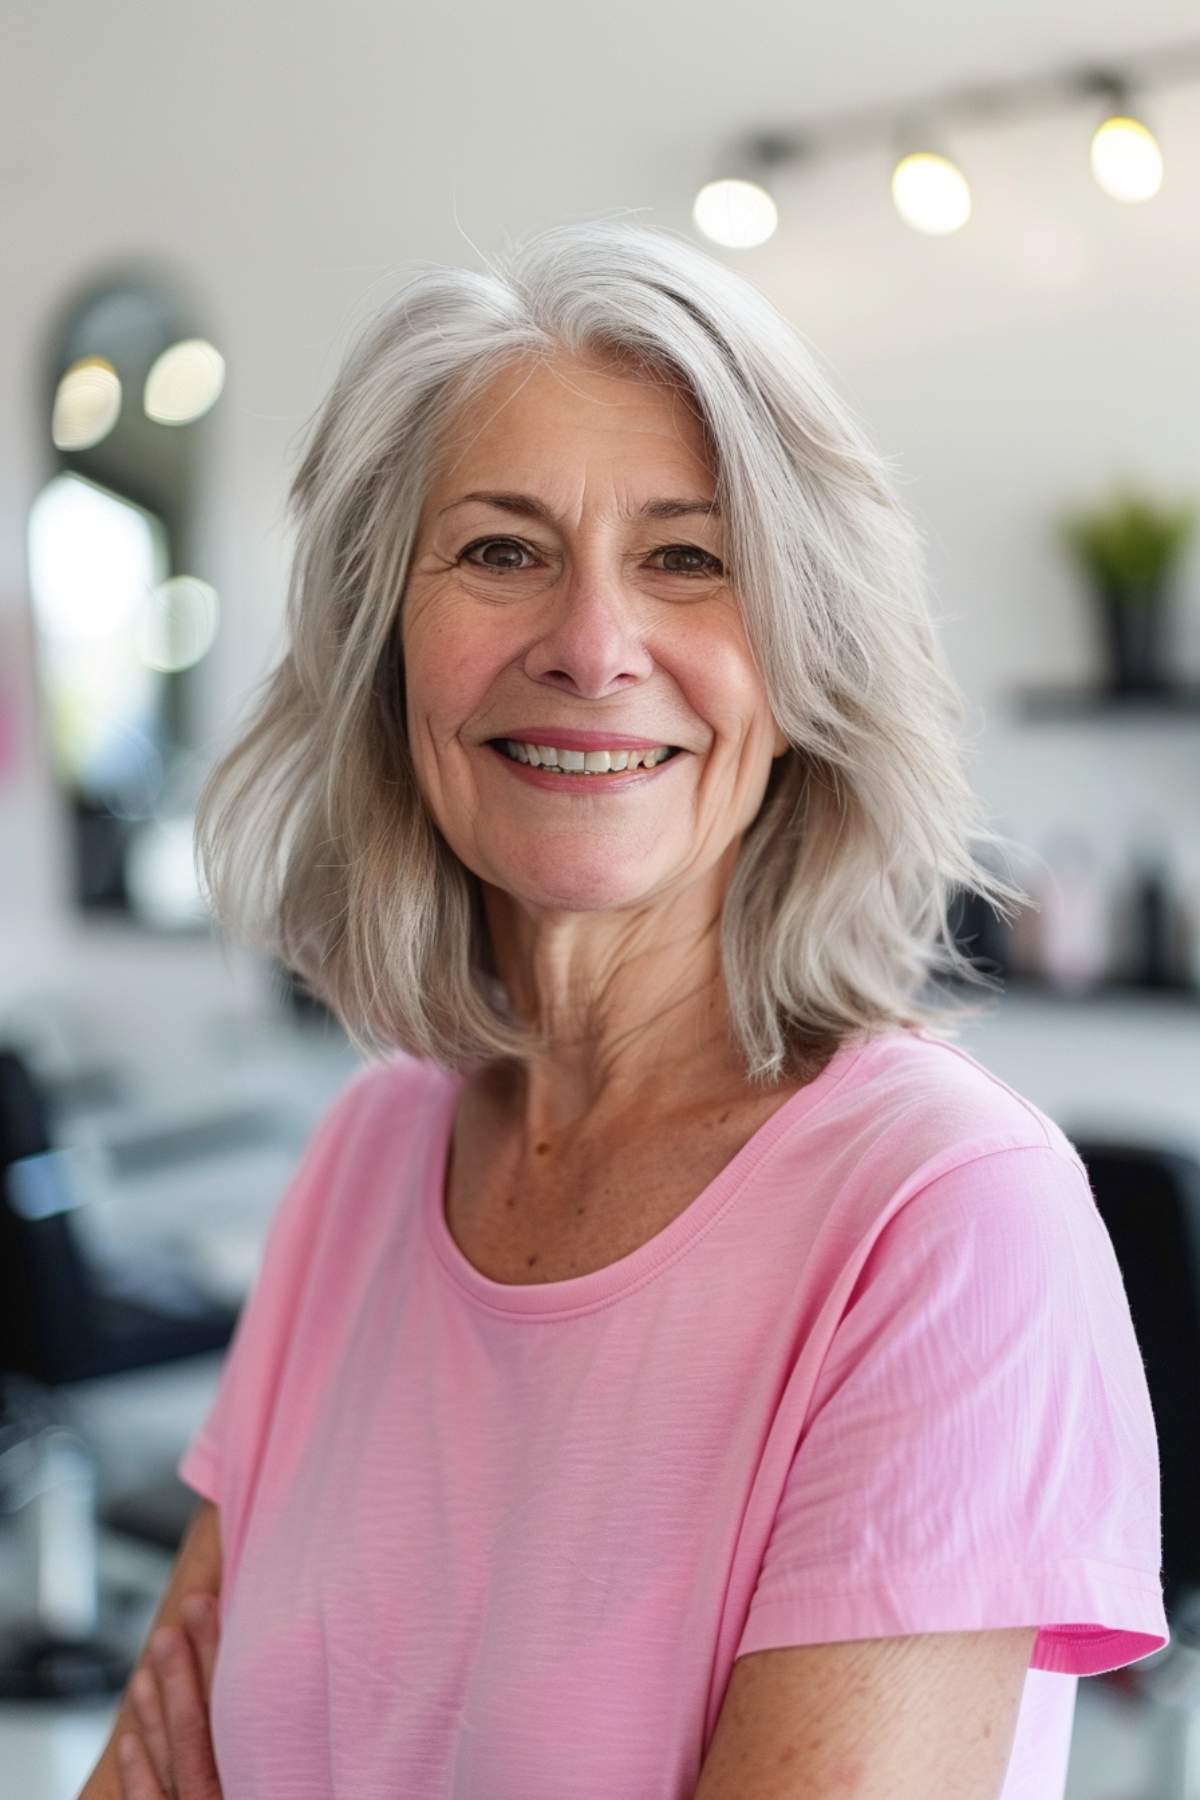 Sahag cut for women over 60 with fine hair, featuring soft waves and delicate layers.